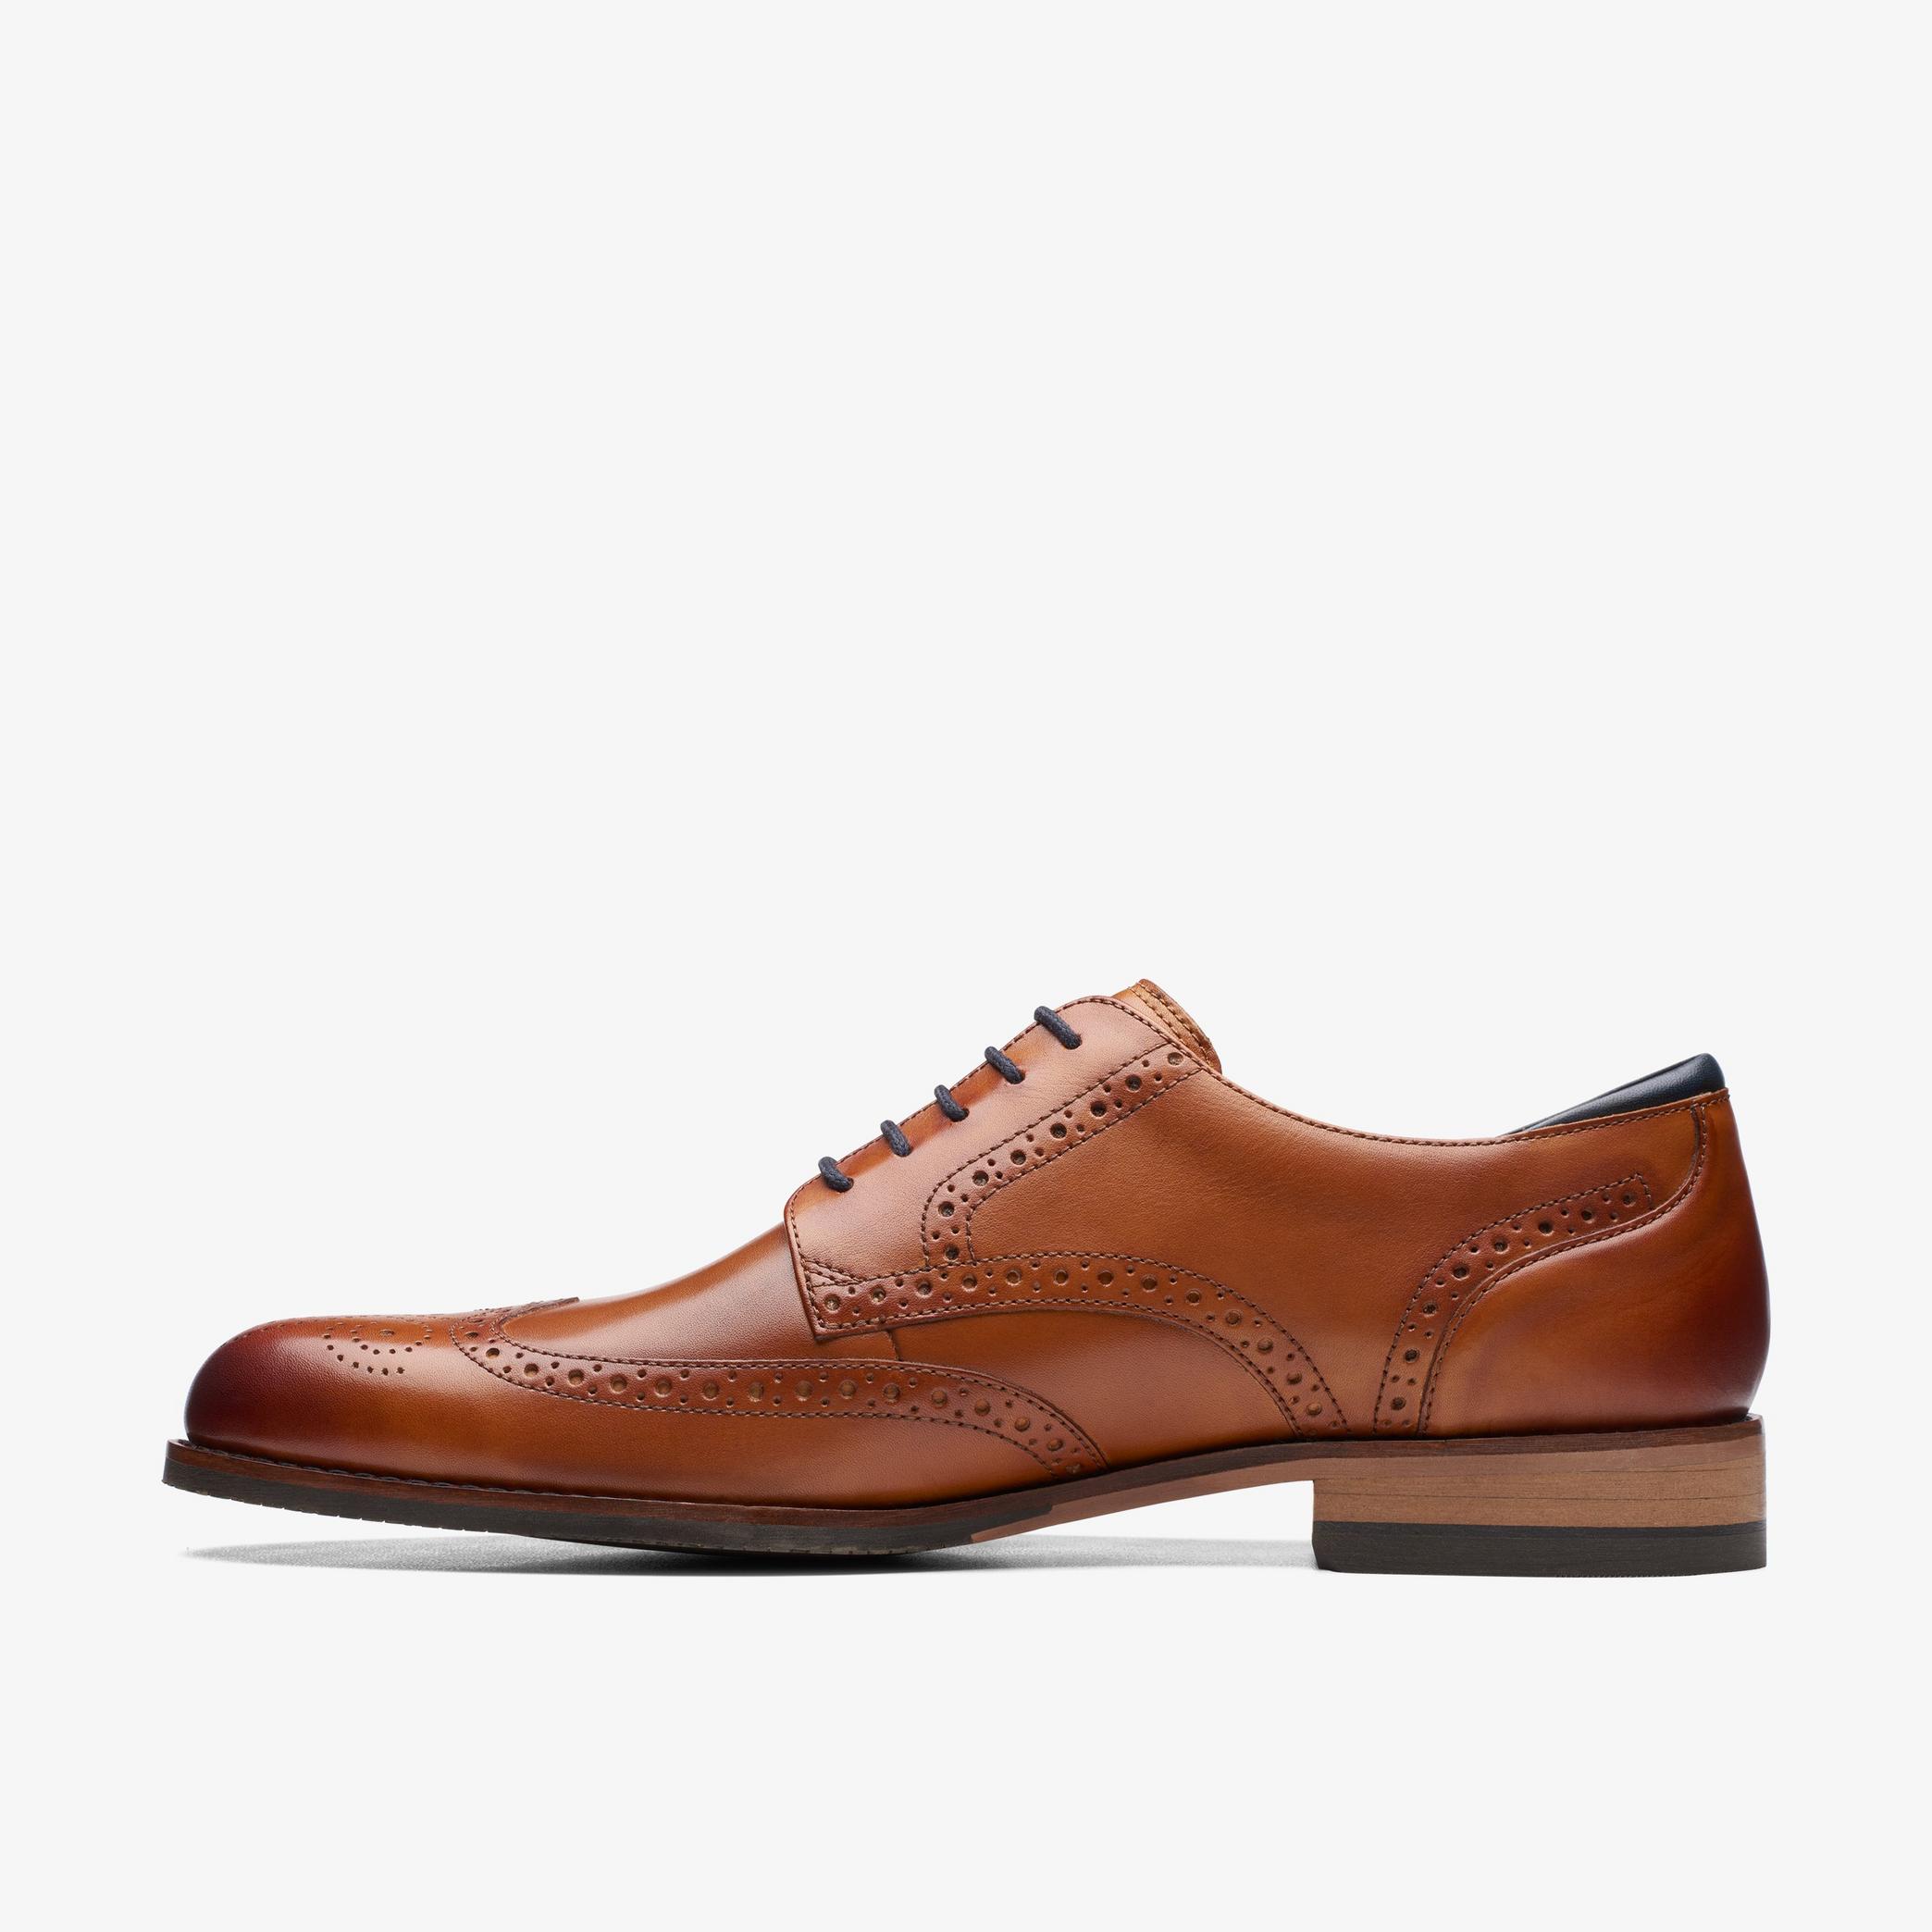 Craft Arlo Limit Tan Leather Oxford Shoes, view 2 of 8